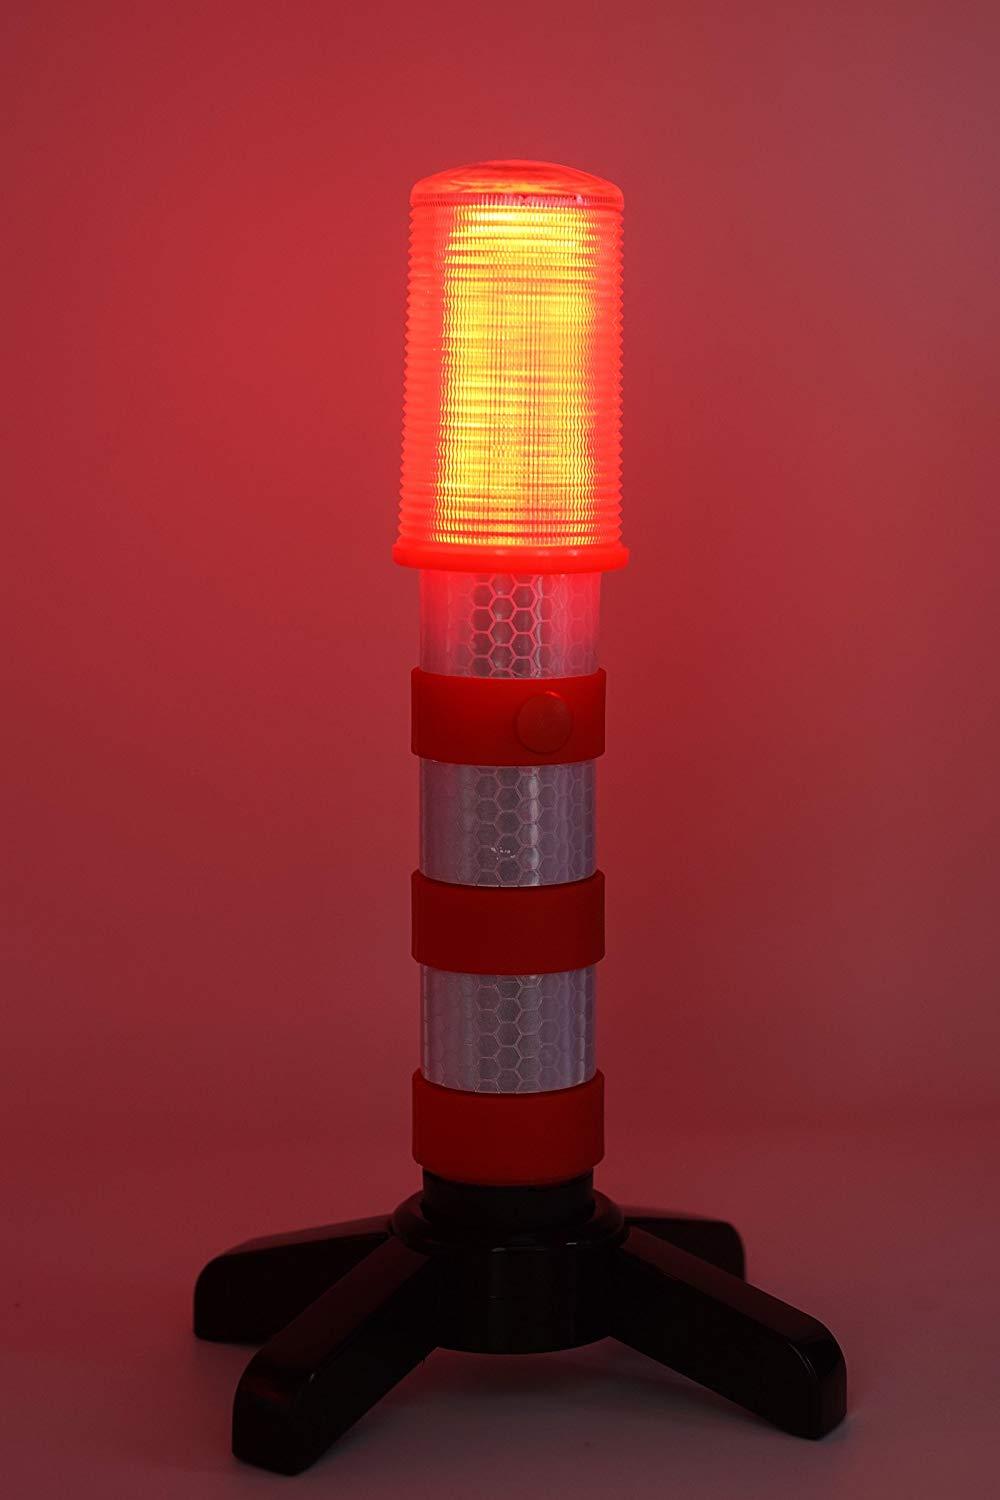 Orange Red 3-Light Mode Road Security Flashing Strobe Light for Emergency Situations